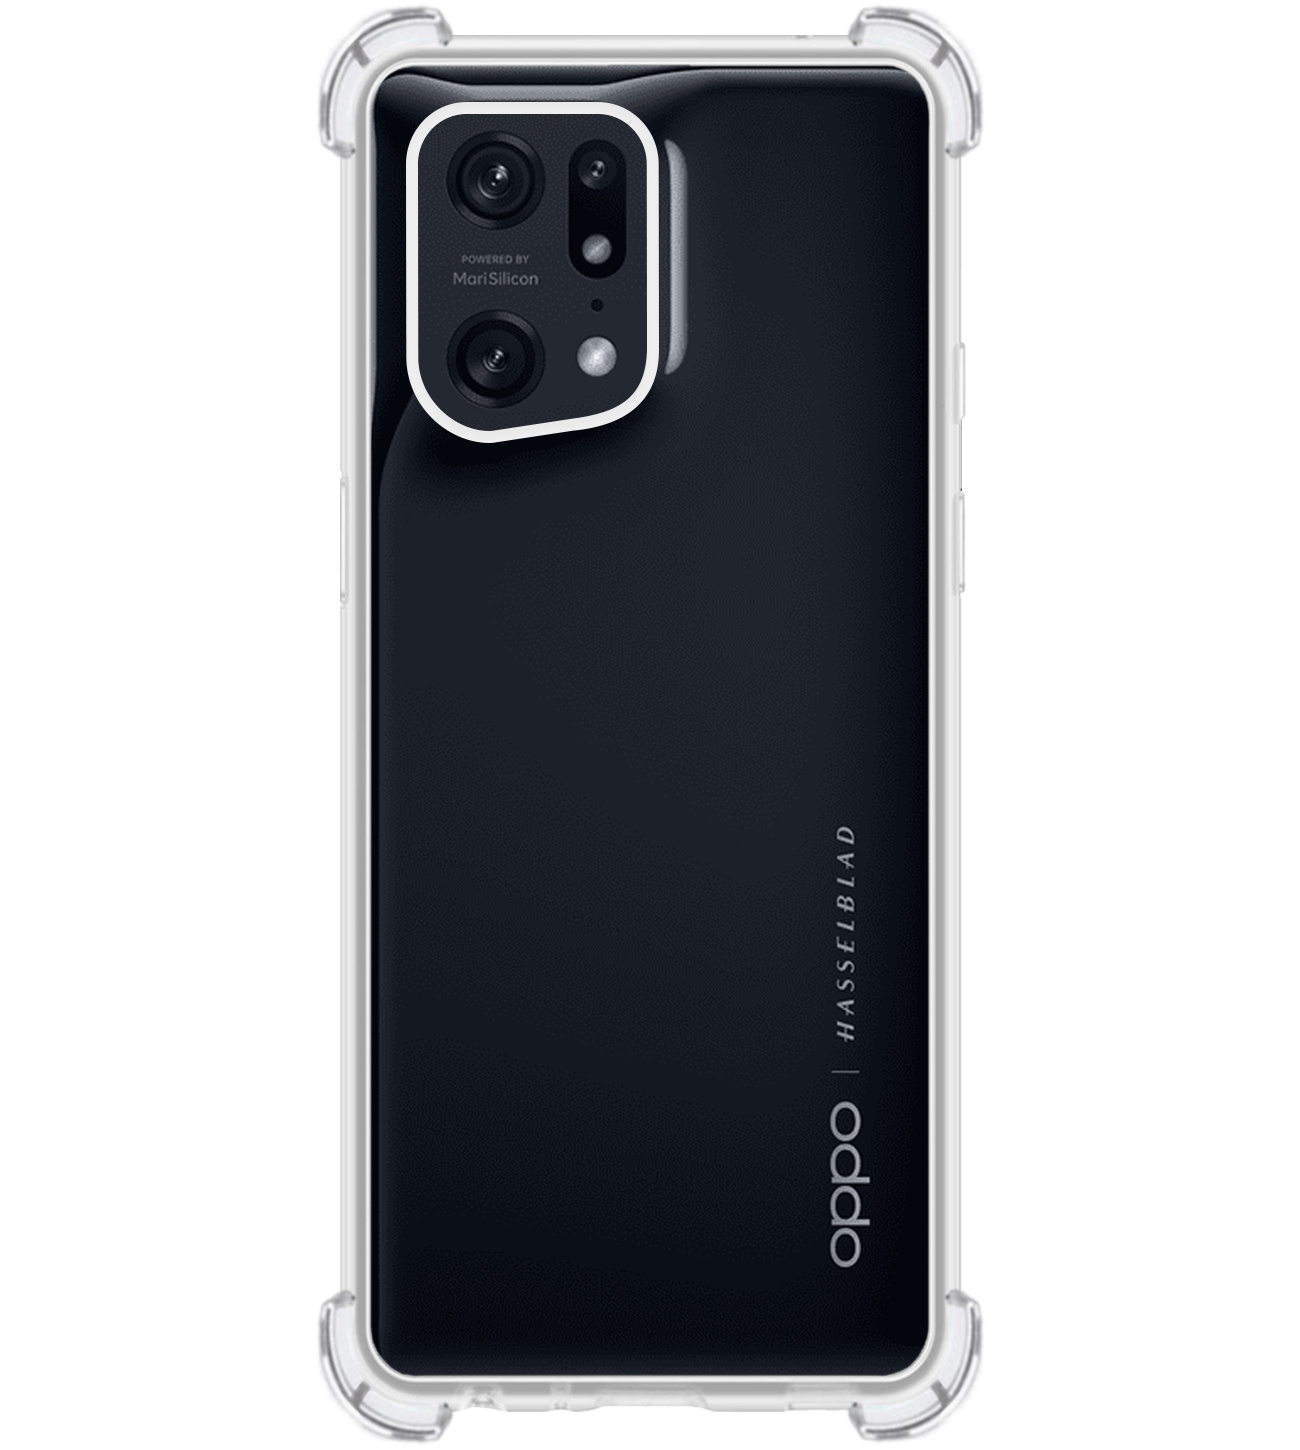 NoXx OPPO Find X5 Pro Hoesje Cover Shock Proof Case Hoes - 2x - Transparant